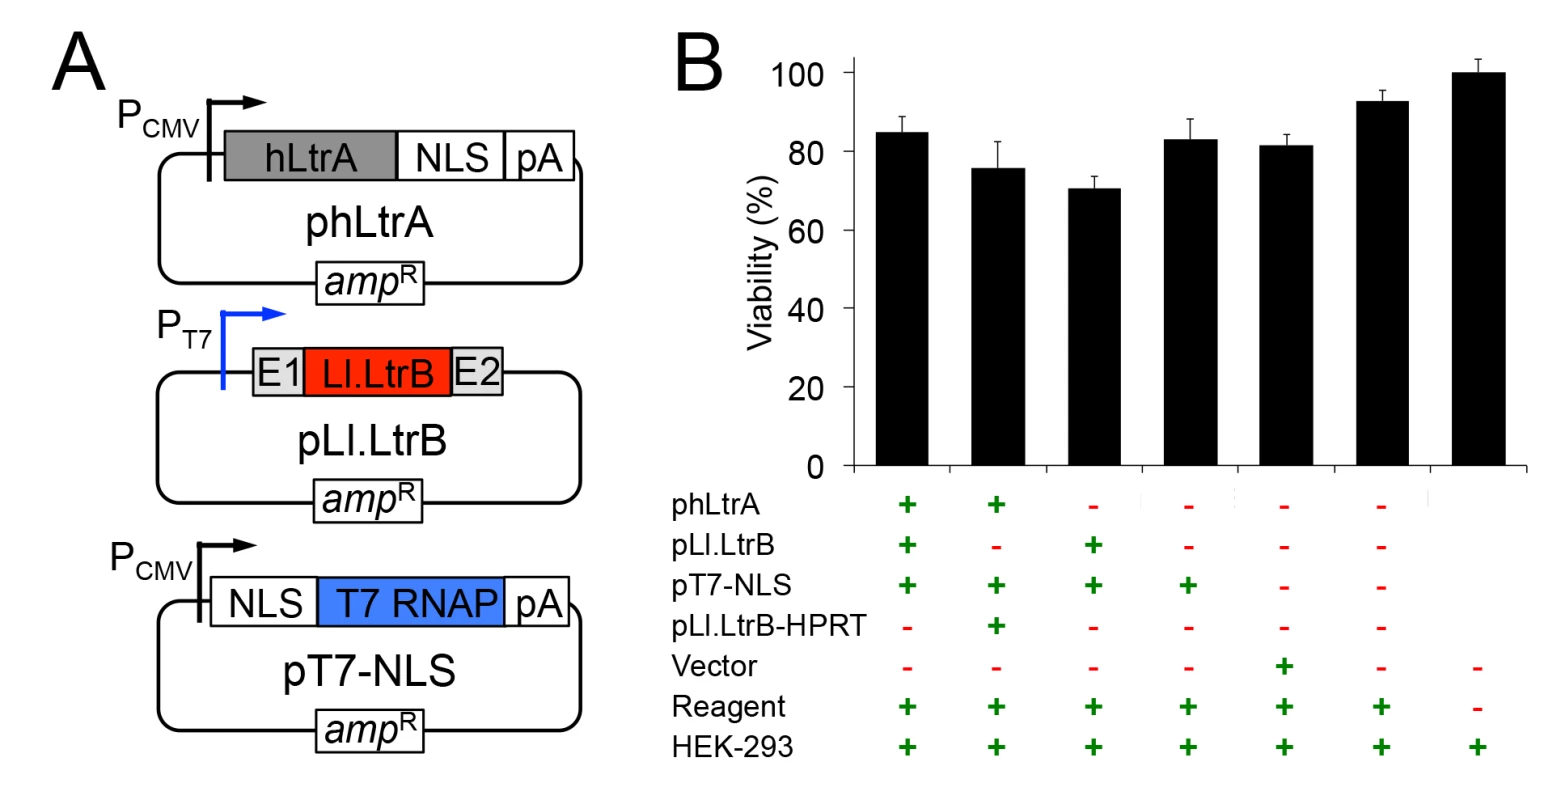 Plasmids used for expressing the mobile Ll.LtrB group II intron in human cells and their effect on cell viability.